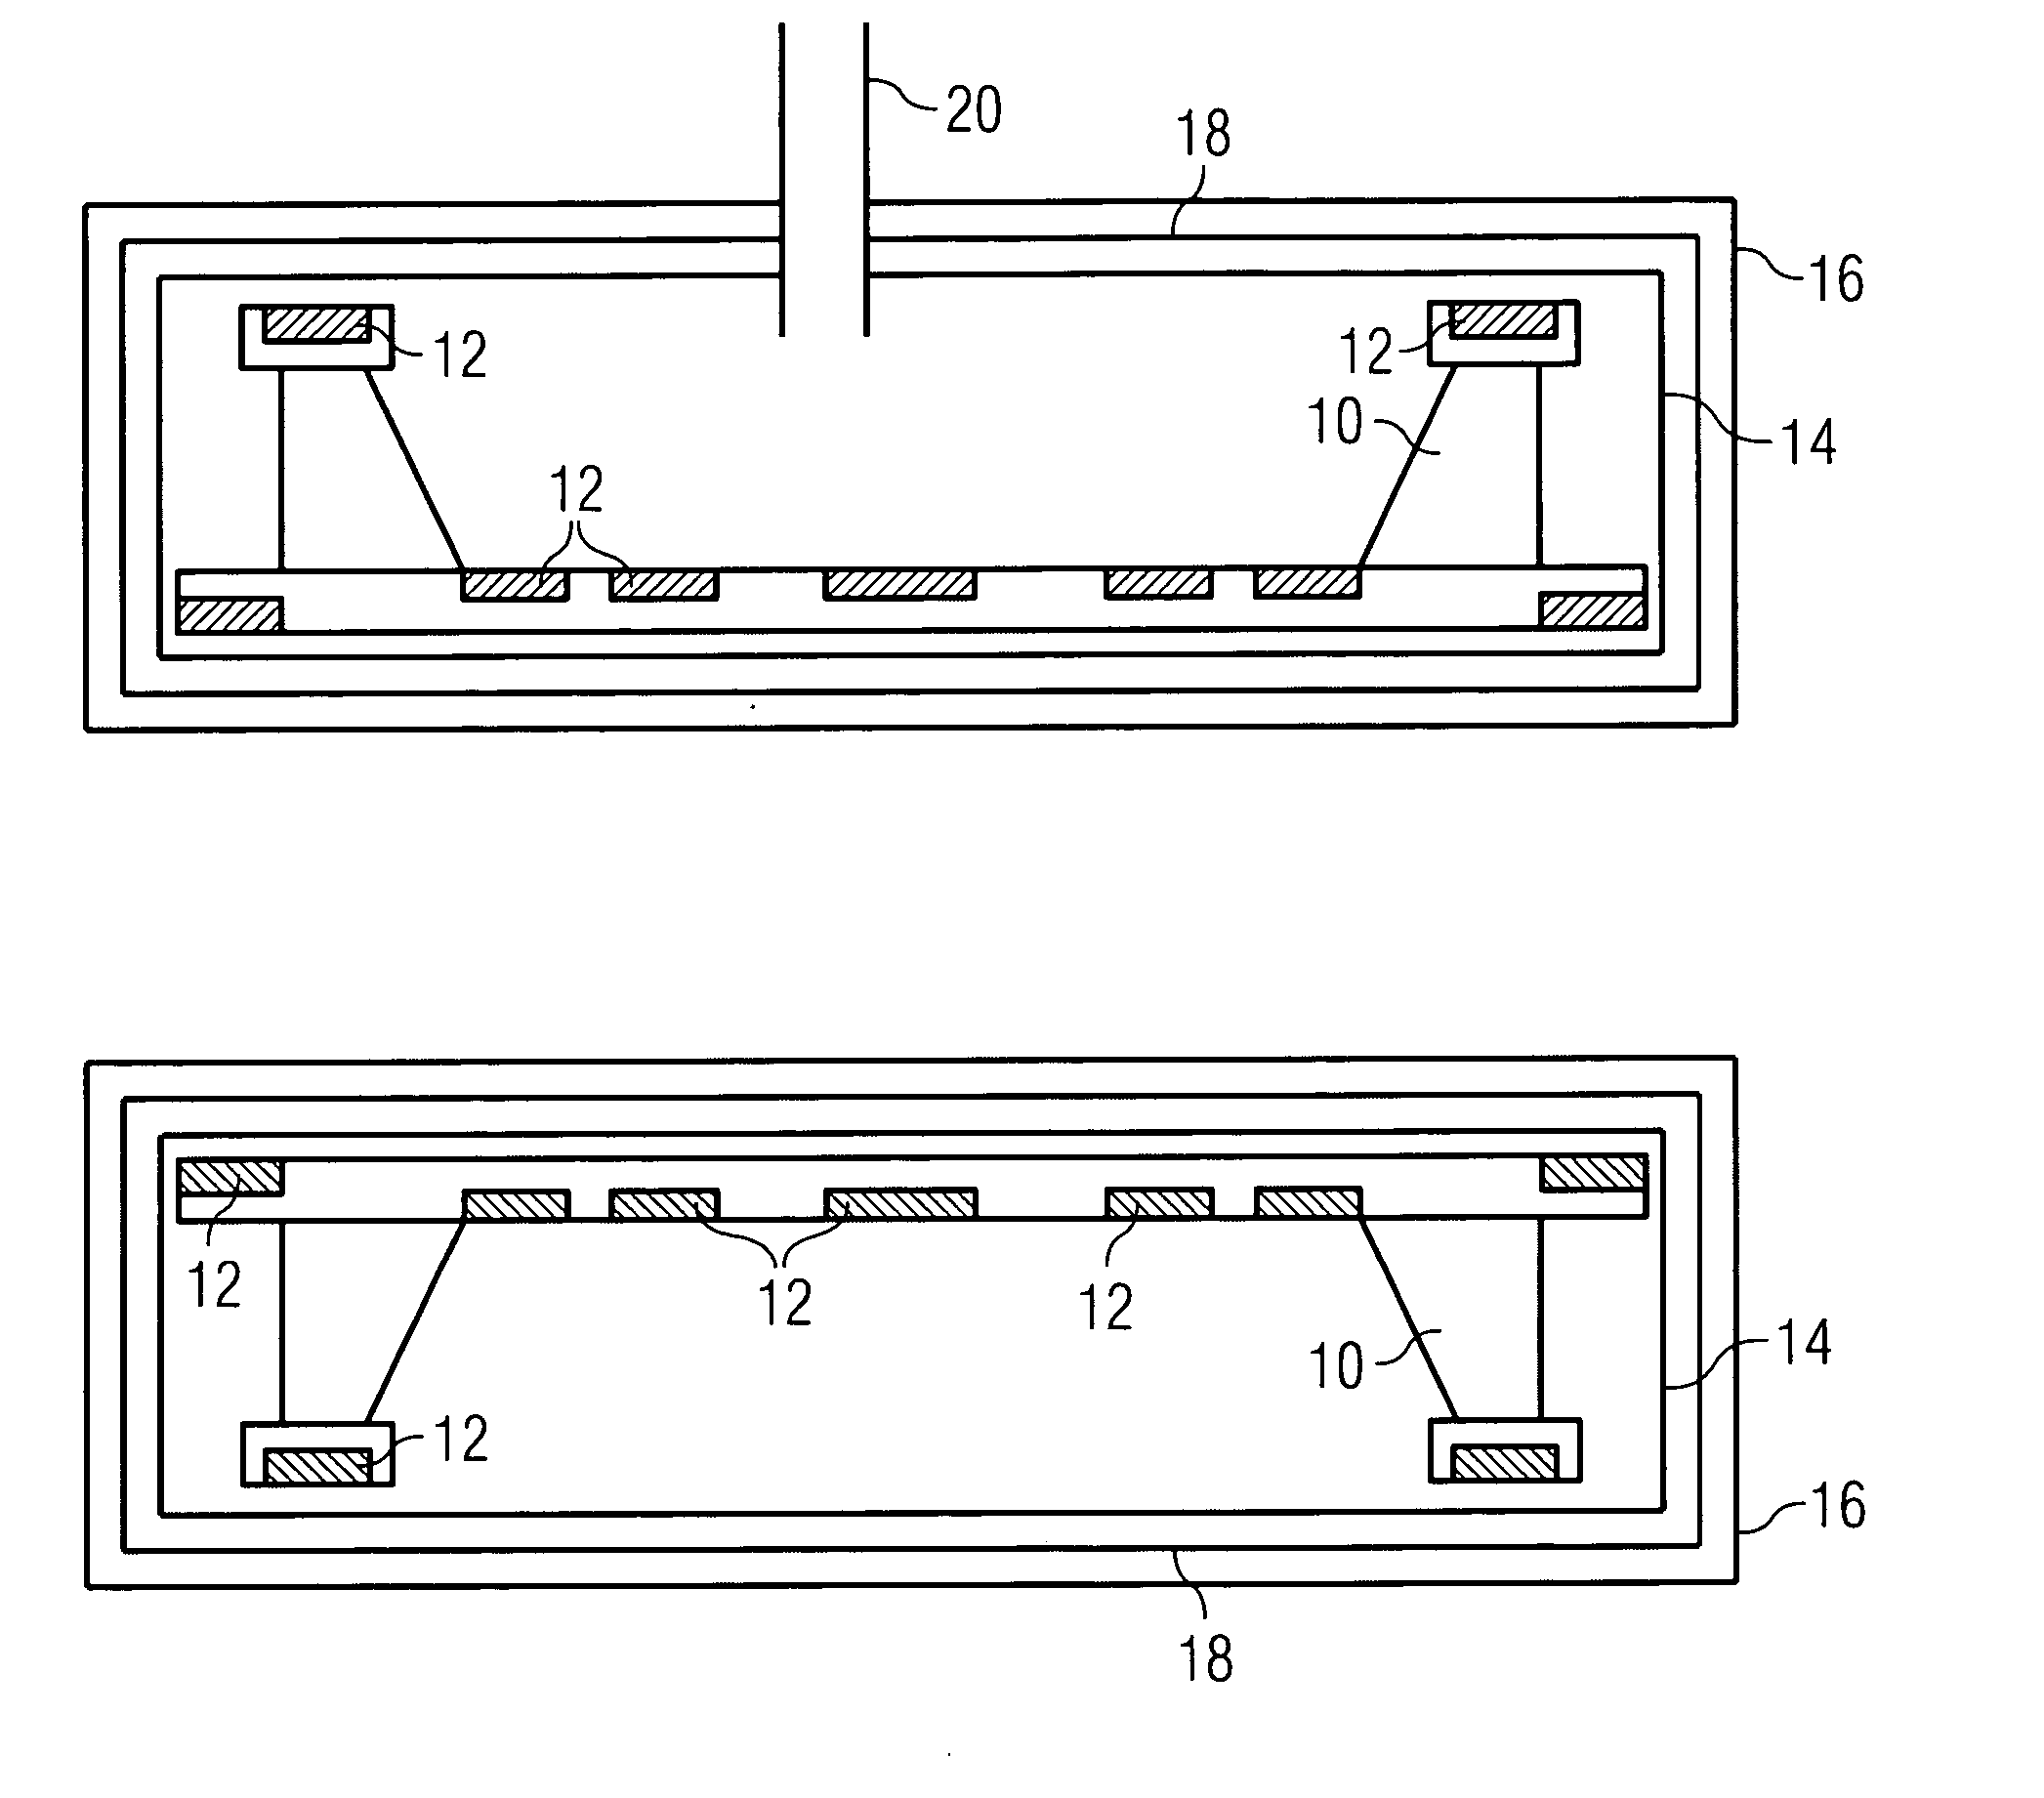 Method and apparatus for maintaining a system at cryogenic temperatures over an extended period without active refrigeration